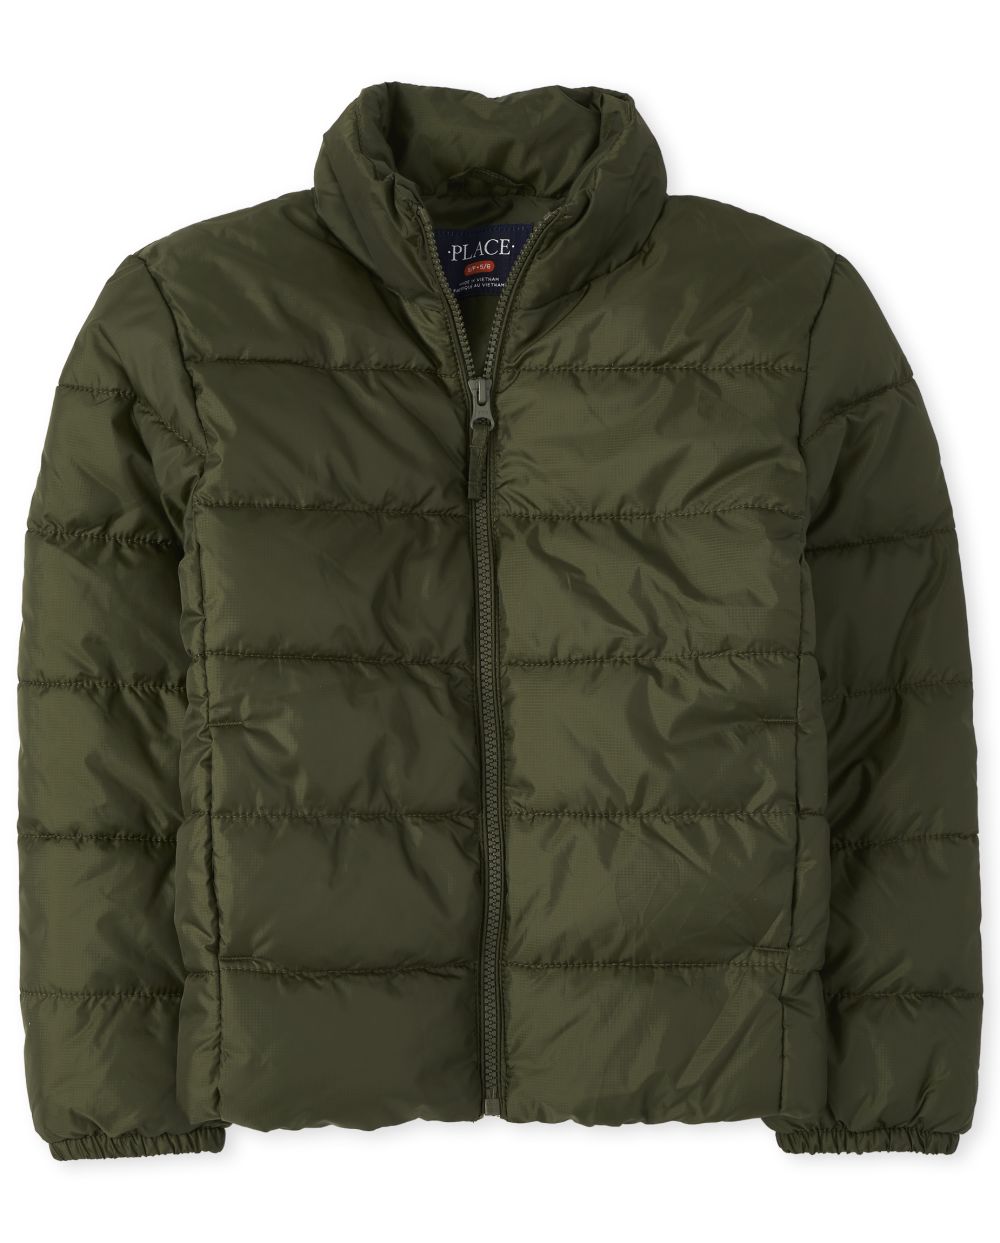 Boys Puffer Jacket for $19.99 Available in various colors and sizes ...